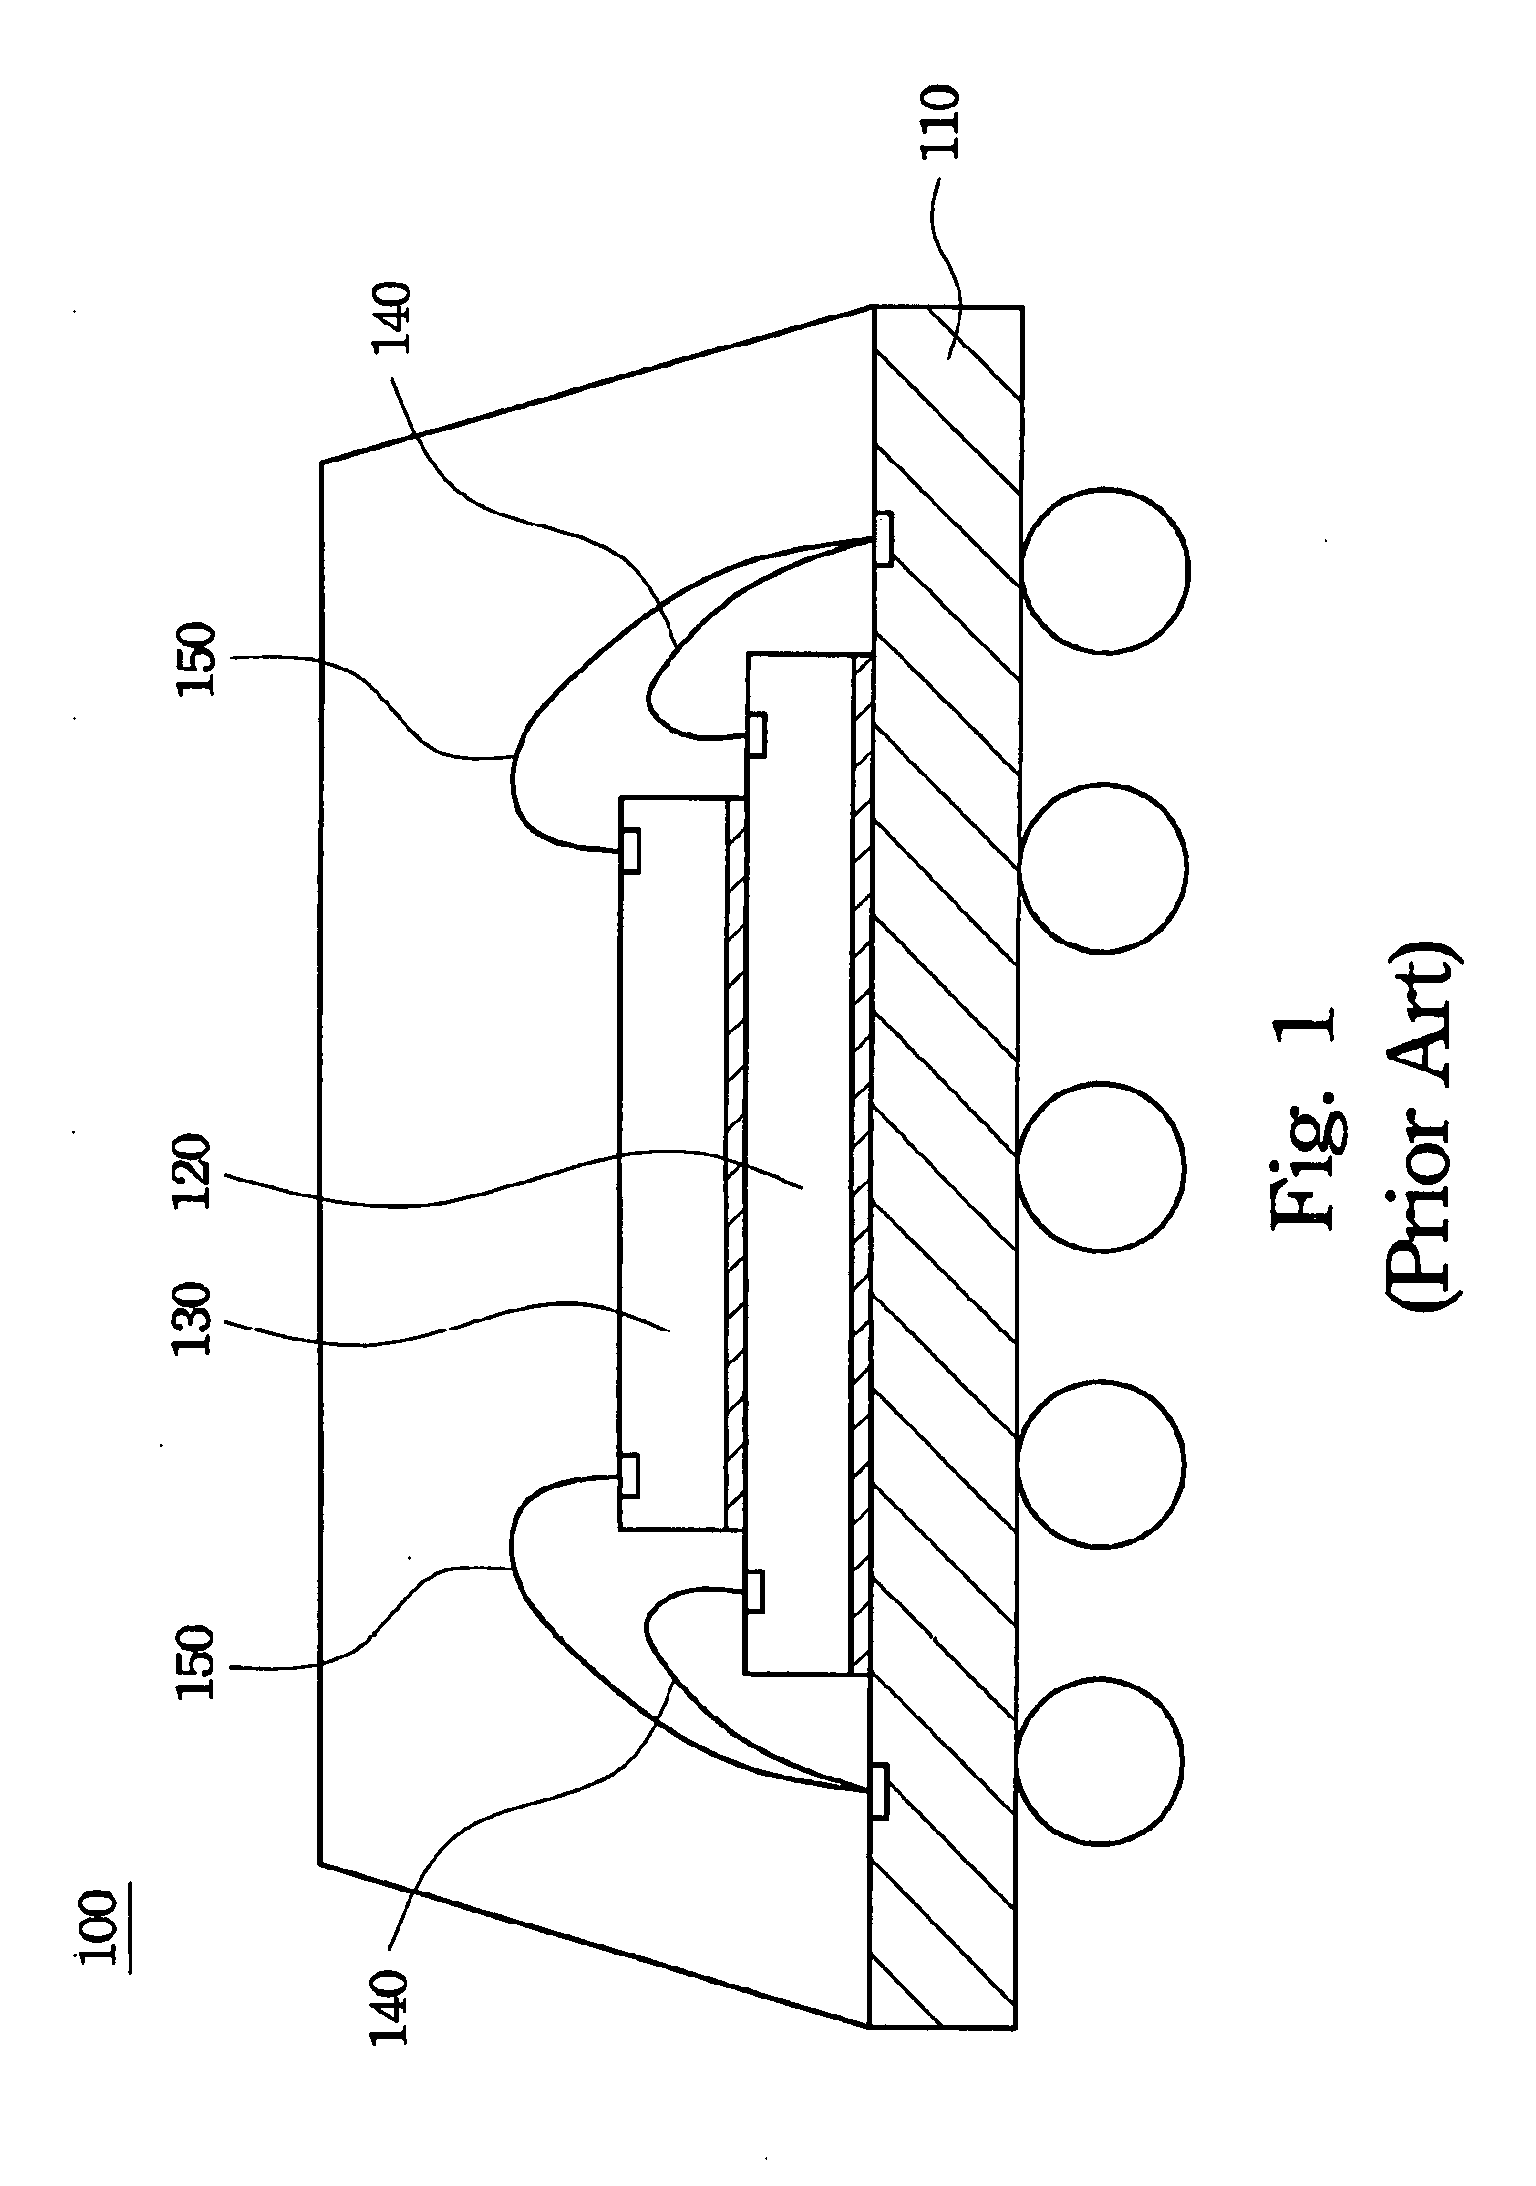 Chip-Stacked Package Structure